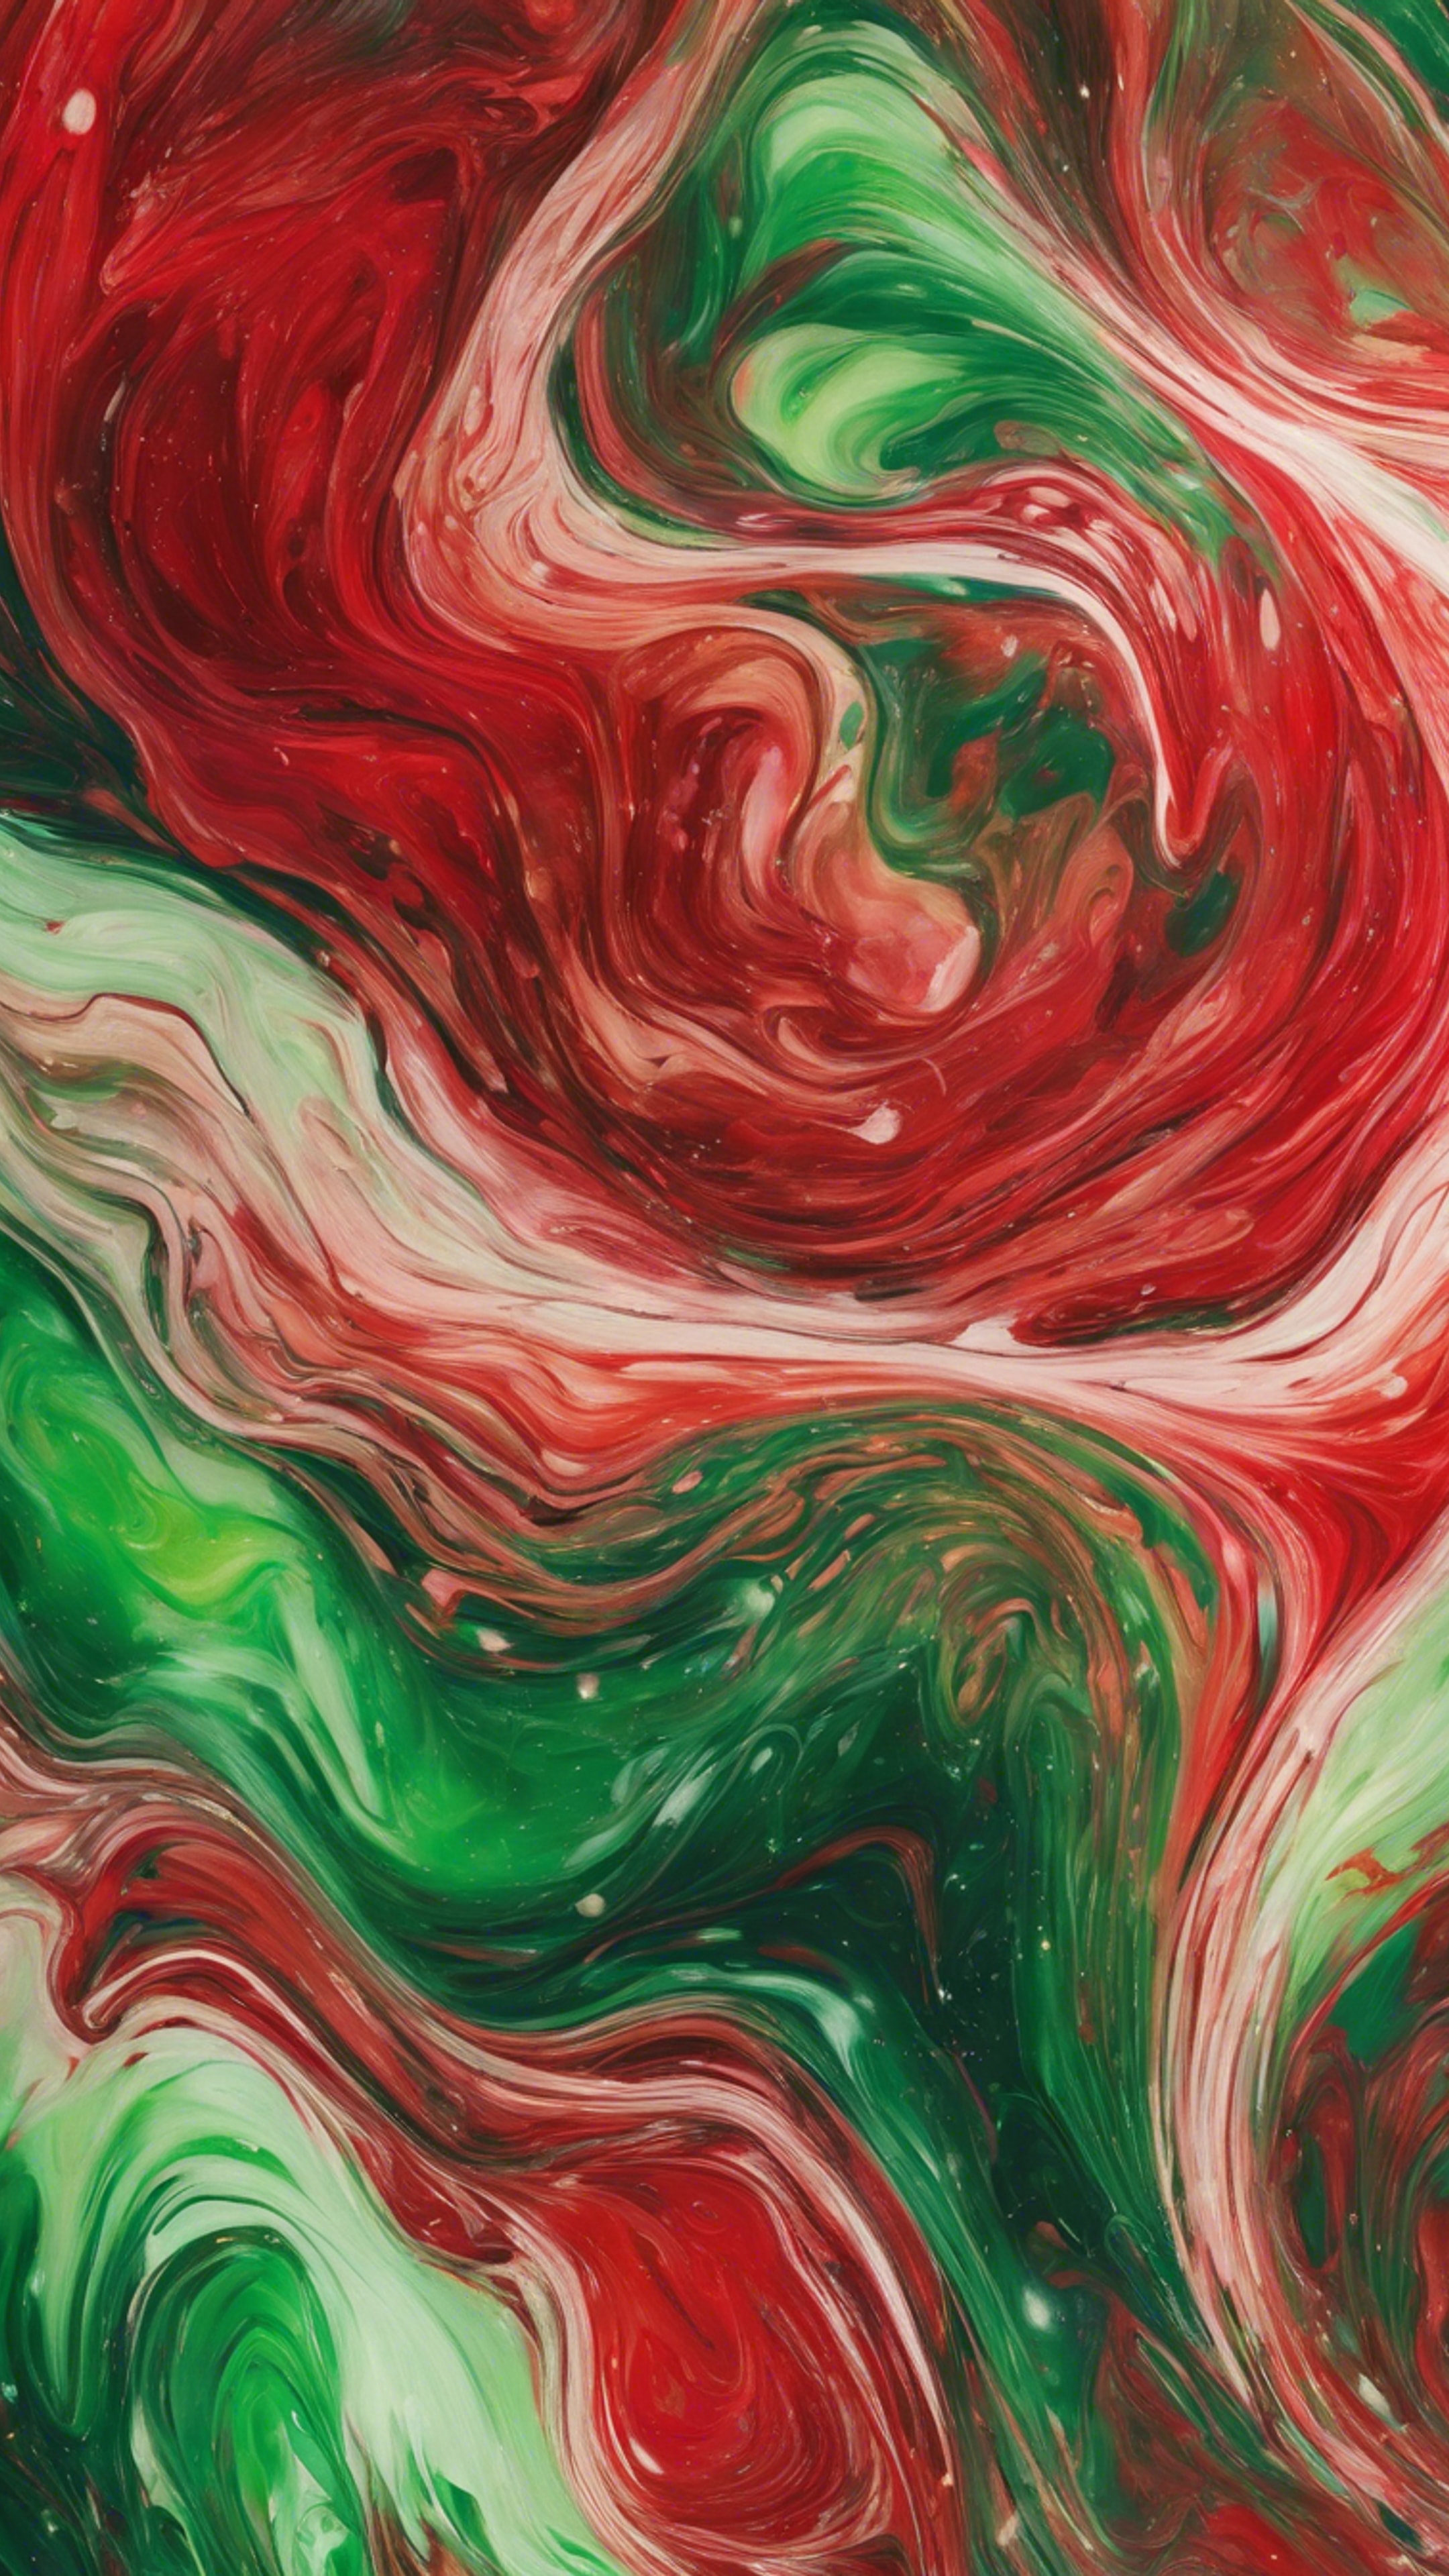 A vivid painting of swirling red and green abstract patterns Wallpaper[5978fc4bccef4bcc8a58]